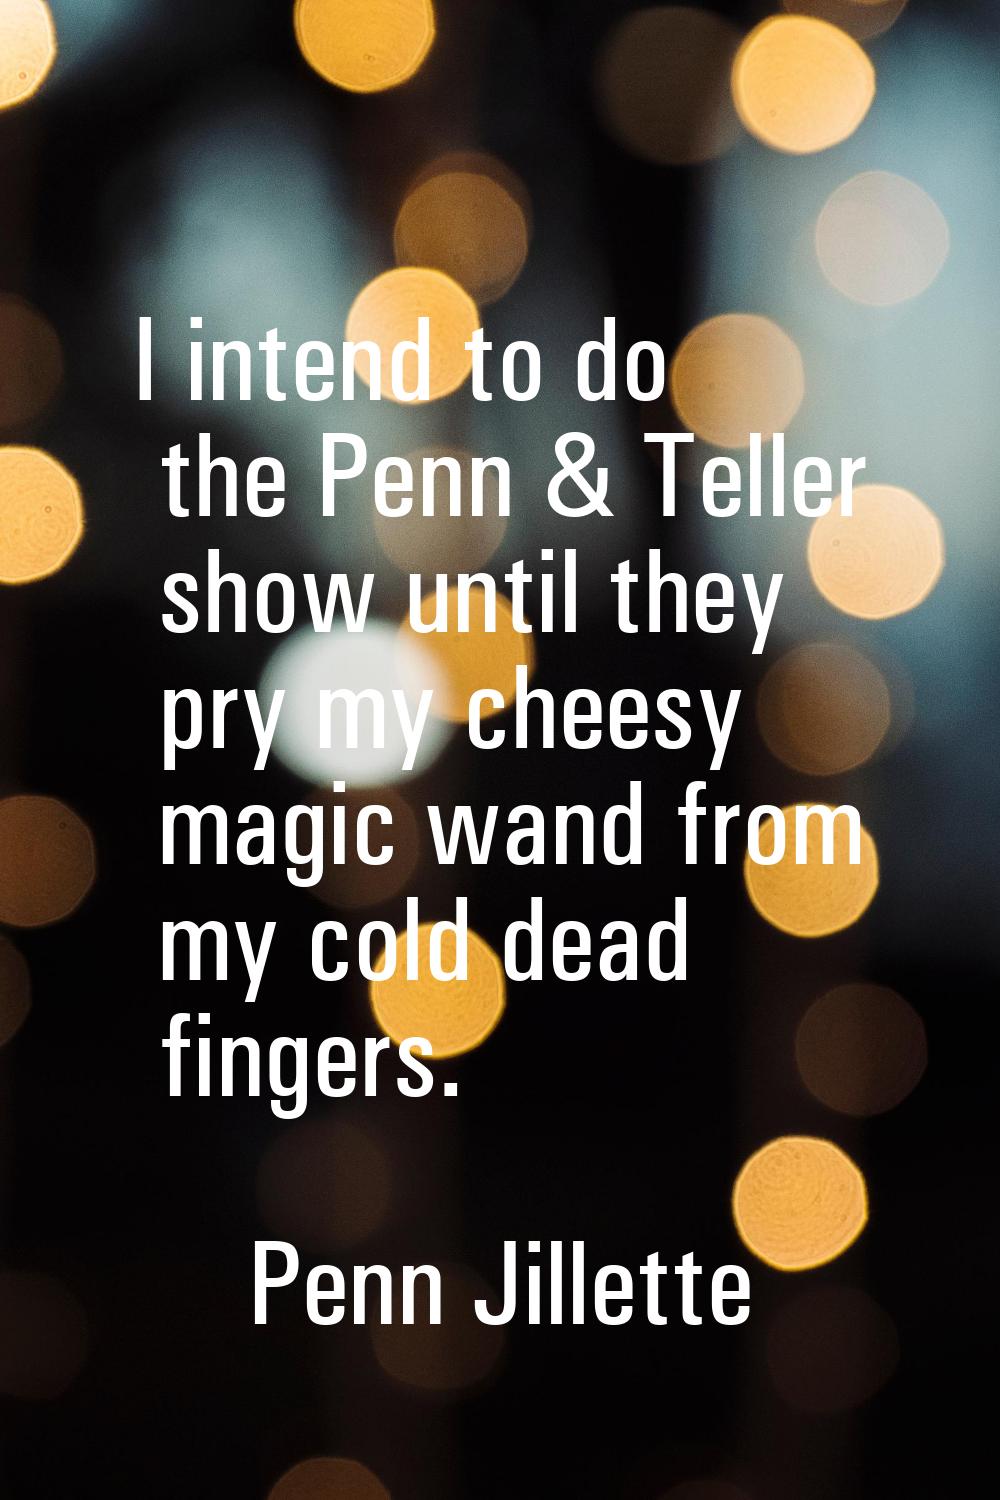 I intend to do the Penn & Teller show until they pry my cheesy magic wand from my cold dead fingers